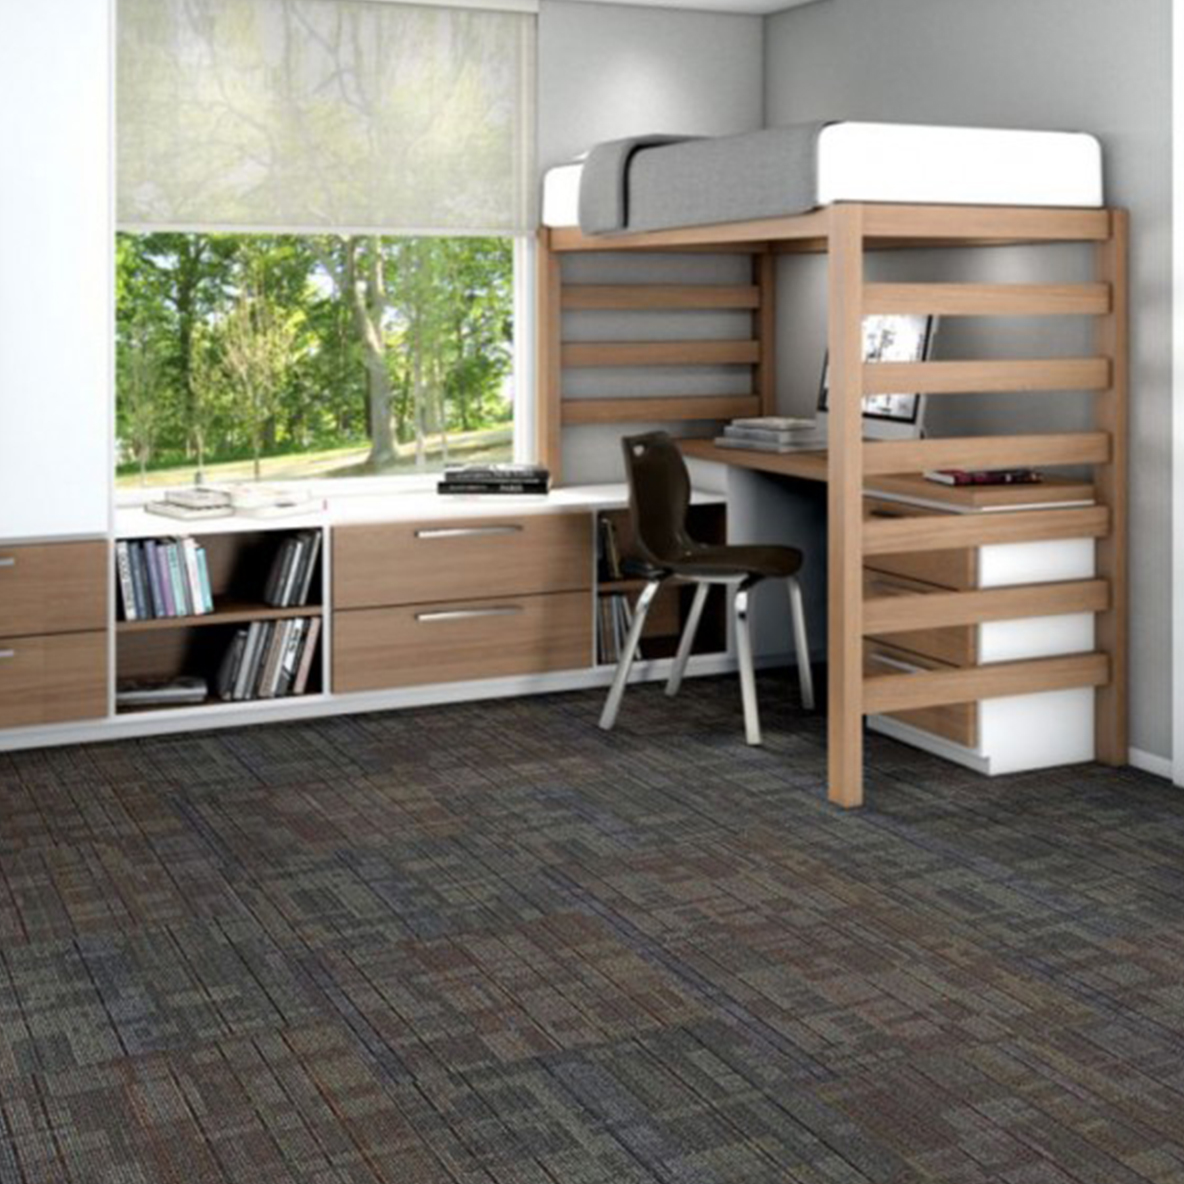 Out of Bounds Commercial Carpet Tile .25 Inch x 2x2 Ft. 13 per Carton Intermix colors kids bunks in Cabin